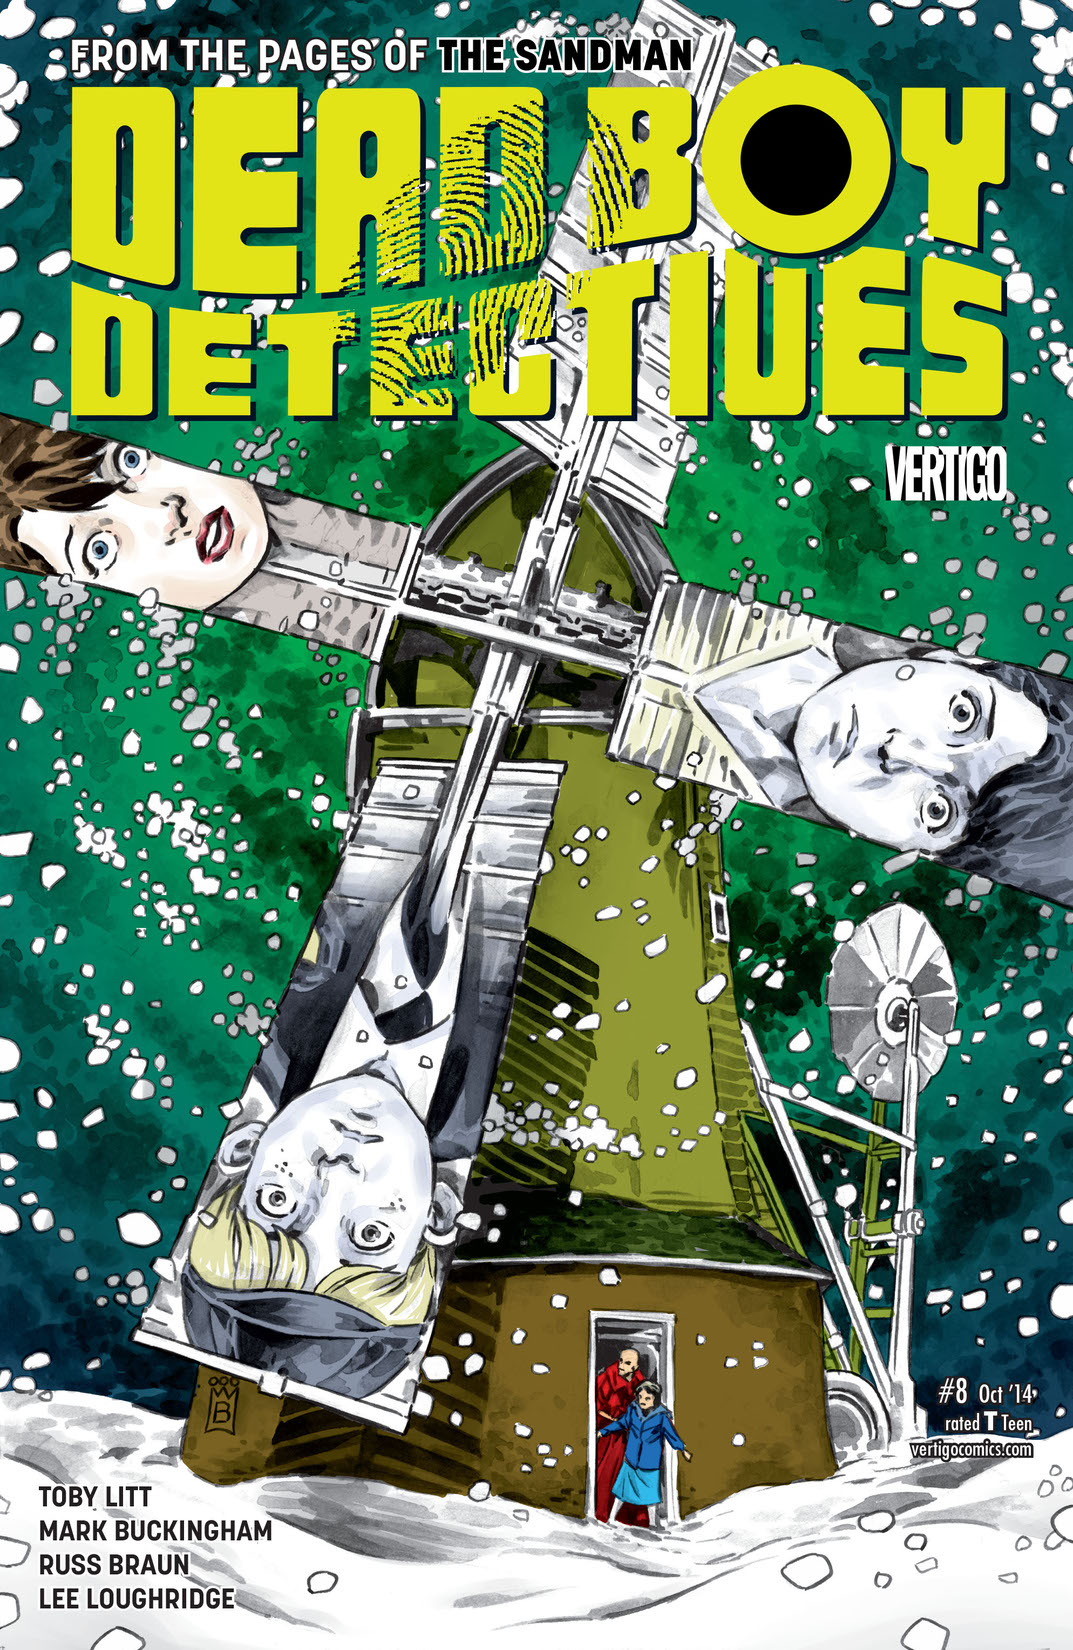 The Dead Boy Detectives #8 preview images